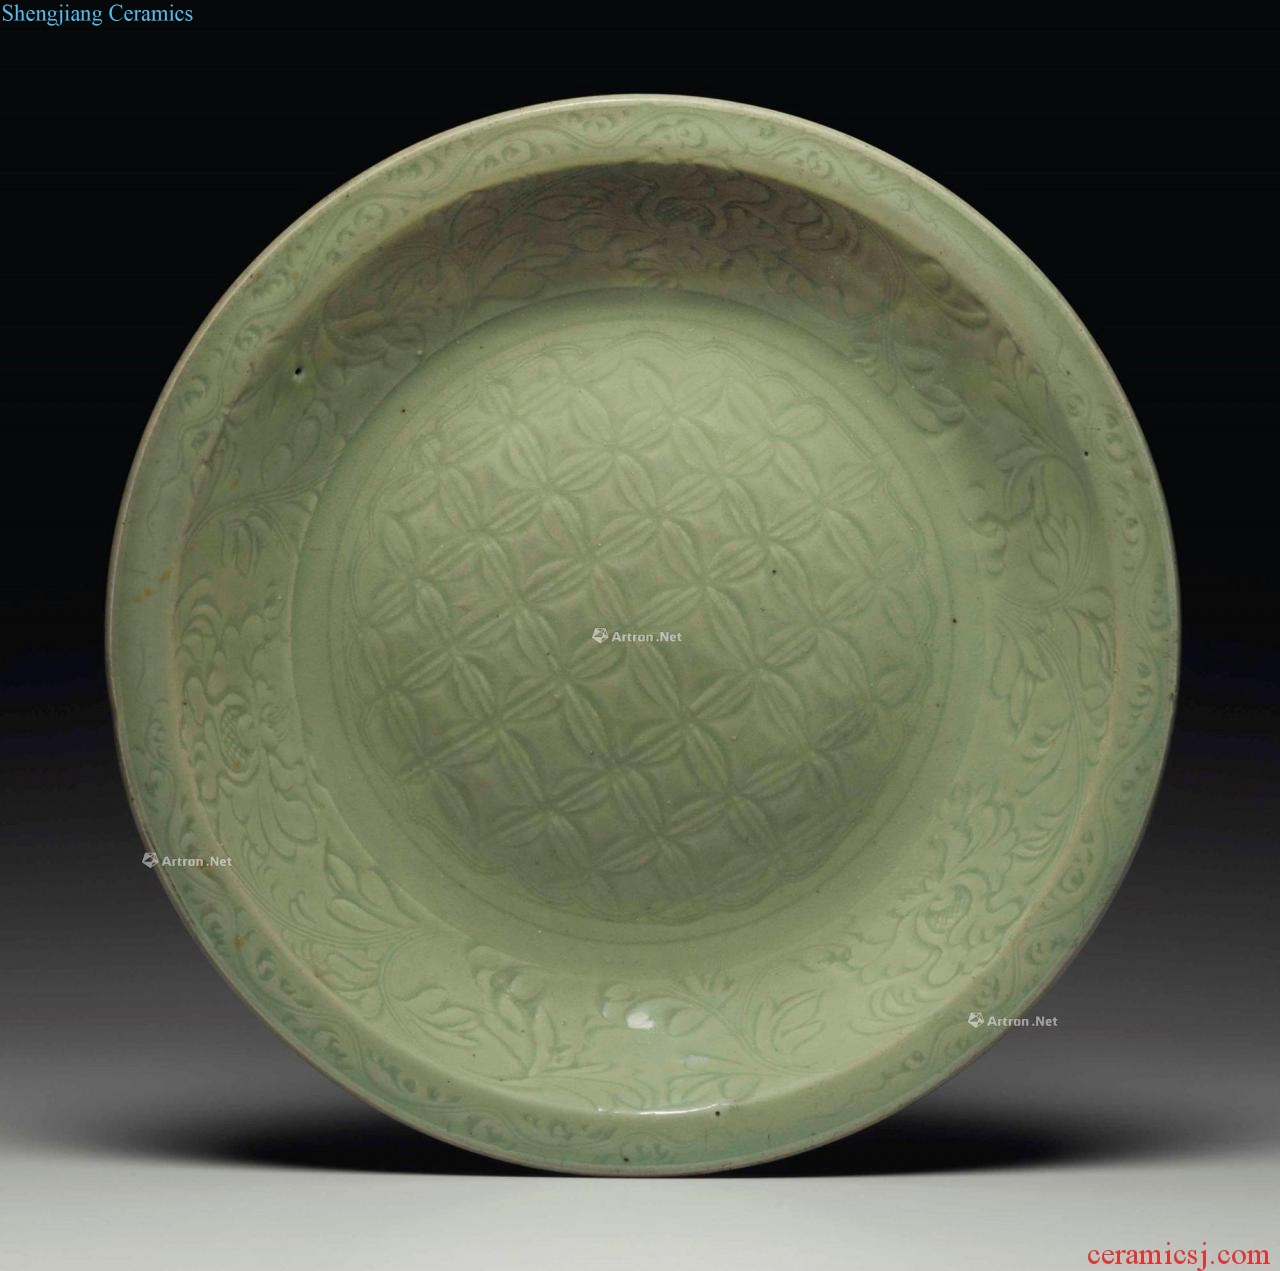 In the Ming dynasty (1368-1644), A LARGE LONGQUAN CELADON CARVED DISH